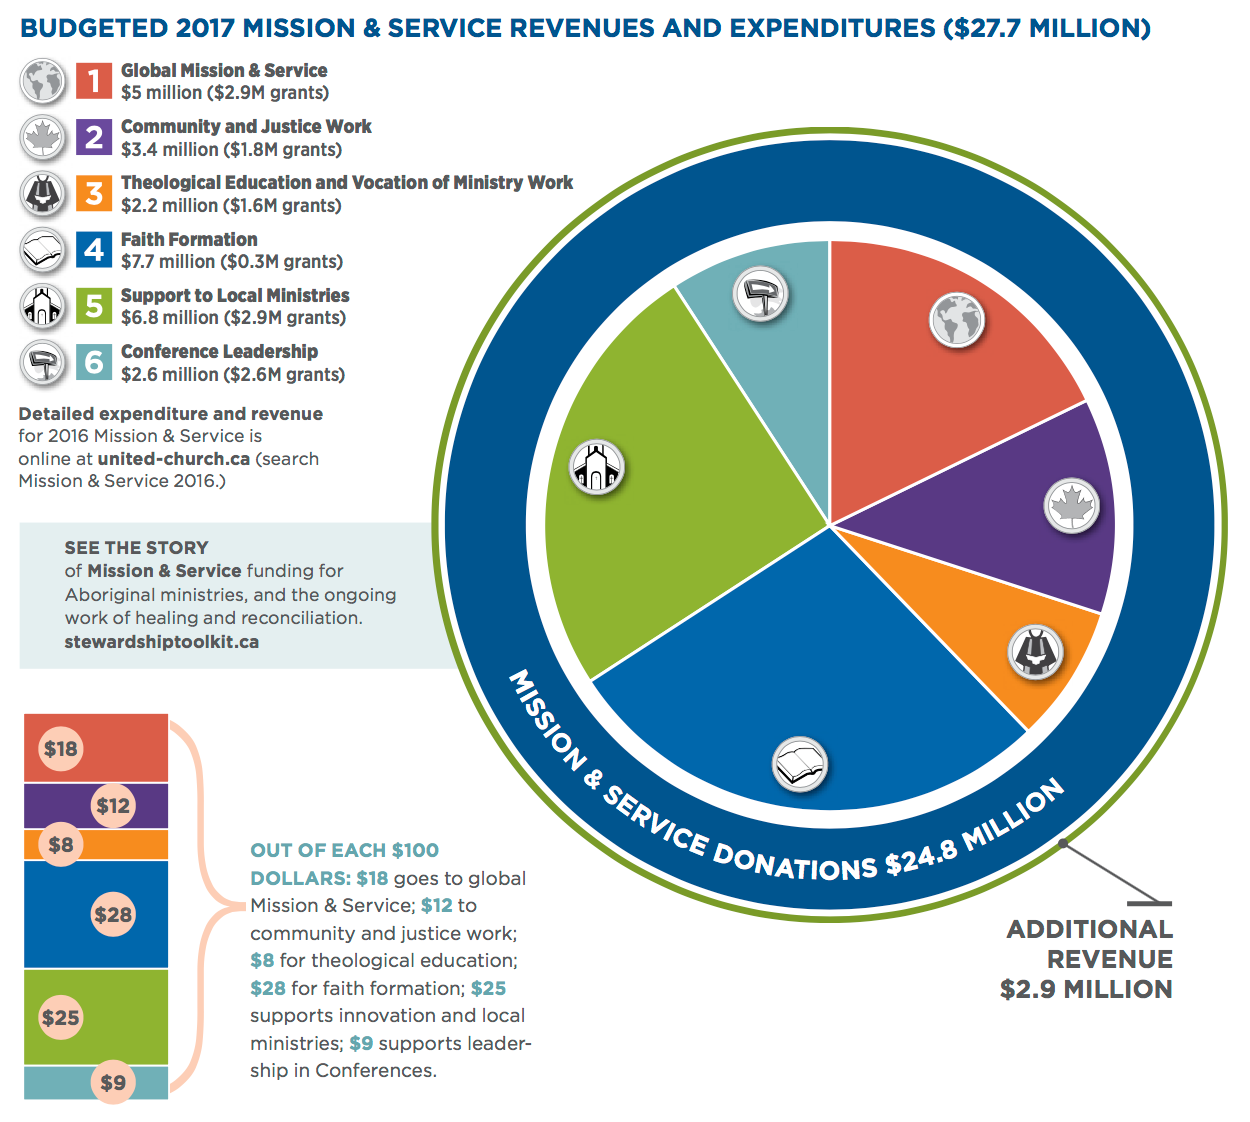 Budgeted 2017 Mission & Service Revenues and Expenditures